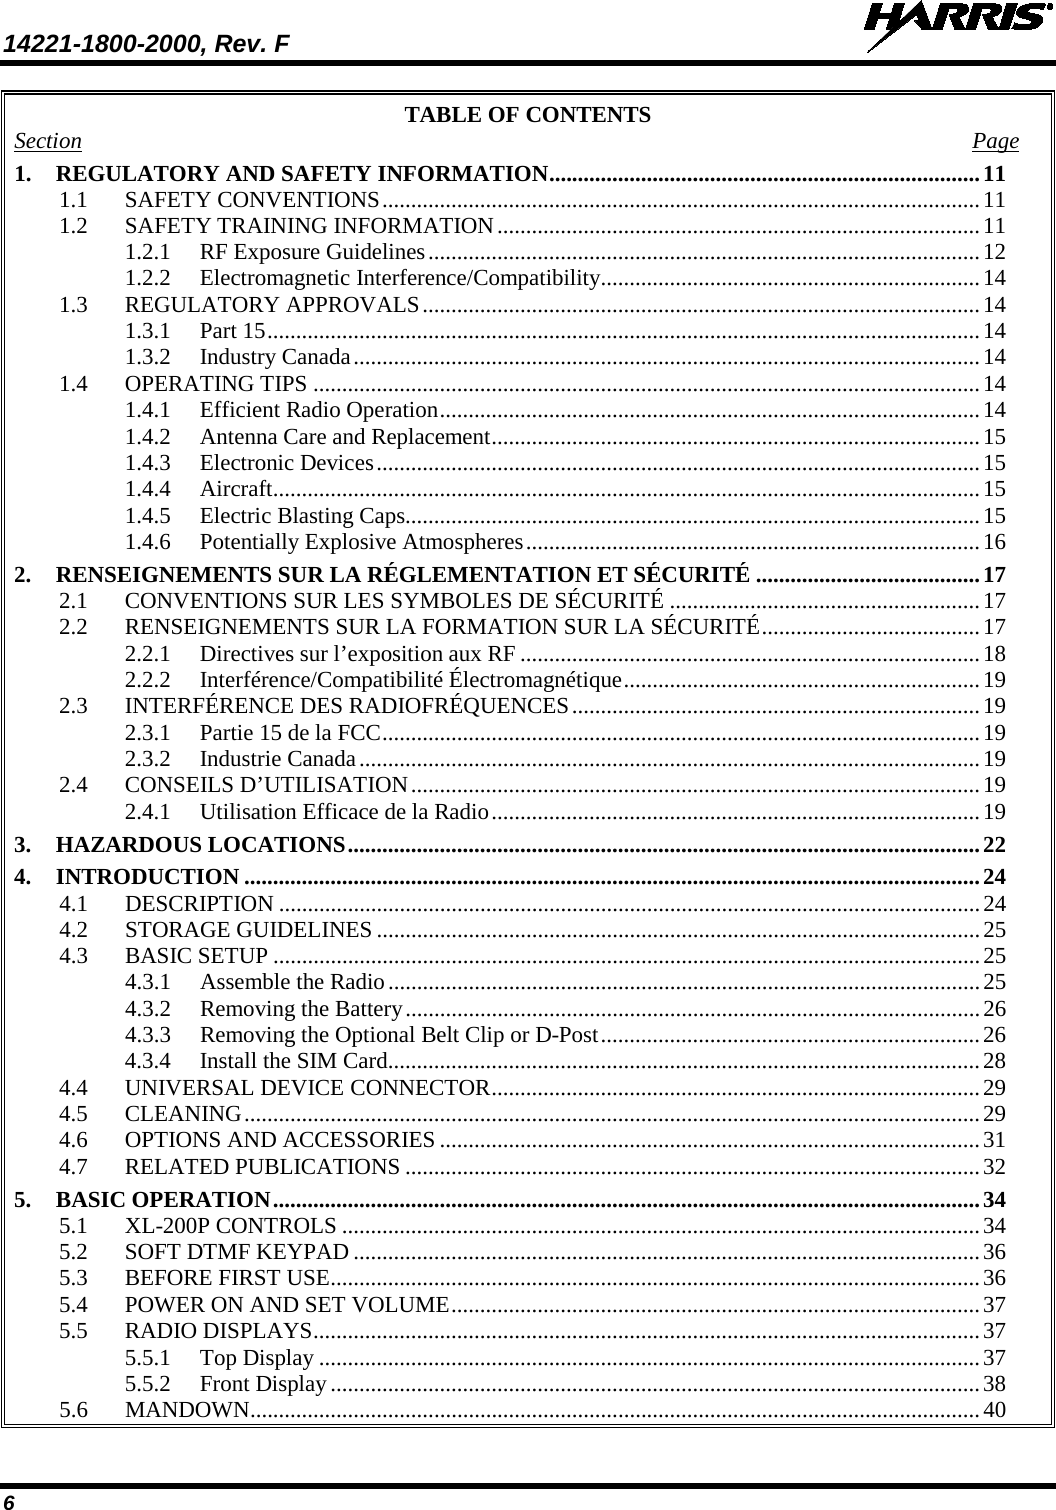 14221-1800-2000, Rev. F   6 TABLE OF CONTENTS Section  Page 1. REGULATORY AND SAFETY INFORMATION ........................................................................... 11 1.1 SAFETY CONVENTIONS ........................................................................................................ 11 1.2 SAFETY TRAINING INFORMATION .................................................................................... 11 1.2.1 RF Exposure Guidelines ................................................................................................ 12 1.2.2 Electromagnetic Interference/Compatibility .................................................................. 14 1.3 REGULATORY APPROVALS ................................................................................................. 14 1.3.1 Part 15 ............................................................................................................................ 14 1.3.2 Industry Canada ............................................................................................................. 14 1.4 OPERATING TIPS .................................................................................................................... 14 1.4.1 Efficient Radio Operation .............................................................................................. 14 1.4.2 Antenna Care and Replacement ..................................................................................... 15 1.4.3 Electronic Devices ......................................................................................................... 15 1.4.4 Aircraft ........................................................................................................................... 15 1.4.5 Electric Blasting Caps .................................................................................................... 15 1.4.6 Potentially Explosive Atmospheres ............................................................................... 16 2. RENSEIGNEMENTS SUR LA RÉGLEMENTATION ET SÉCURITÉ ....................................... 17 2.1 CONVENTIONS SUR LES SYMBOLES DE SÉCURITÉ ...................................................... 17 2.2 RENSEIGNEMENTS SUR LA FORMATION SUR LA SÉCURITÉ ...................................... 17 2.2.1 Directives sur l’exposition aux RF ................................................................................ 18 2.2.2 Interférence/Compatibilité Électromagnétique .............................................................. 19 2.3 INTERFÉRENCE DES RADIOFRÉQUENCES ....................................................................... 19 2.3.1 Partie 15 de la FCC ........................................................................................................ 19 2.3.2 Industrie Canada ............................................................................................................ 19 2.4 CONSEILS D’UTILISATION ................................................................................................... 19 2.4.1 Utilisation Efficace de la Radio ..................................................................................... 19 3. HAZARDOUS LOCATIONS .............................................................................................................. 22 4. INTRODUCTION ................................................................................................................................ 24 4.1 DESCRIPTION .......................................................................................................................... 24 4.2 STORAGE GUIDELINES ......................................................................................................... 25 4.3 BASIC SETUP ........................................................................................................................... 25 4.3.1 Assemble the Radio ....................................................................................................... 25 4.3.2 Removing the Battery .................................................................................................... 26 4.3.3 Removing the Optional Belt Clip or D-Post .................................................................. 26 4.3.4 Install the SIM Card ....................................................................................................... 28 4.4 UNIVERSAL DEVICE CONNECTOR ..................................................................................... 29 4.5 CLEANING ................................................................................................................................ 29 4.6 OPTIONS AND ACCESSORIES .............................................................................................. 31 4.7 RELATED PUBLICATIONS .................................................................................................... 32 5. BASIC OPERATION ........................................................................................................................... 34 5.1 XL-200P CONTROLS ............................................................................................................... 34 5.2 SOFT DTMF KEYPAD ............................................................................................................. 36 5.3 BEFORE FIRST USE ................................................................................................................. 36 5.4 POWER ON AND SET VOLUME ............................................................................................ 37 5.5 RADIO DISPLAYS .................................................................................................................... 37 5.5.1 Top Display ................................................................................................................... 37 5.5.2 Front Display ................................................................................................................. 38 5.6 MANDOWN ............................................................................................................................... 40 